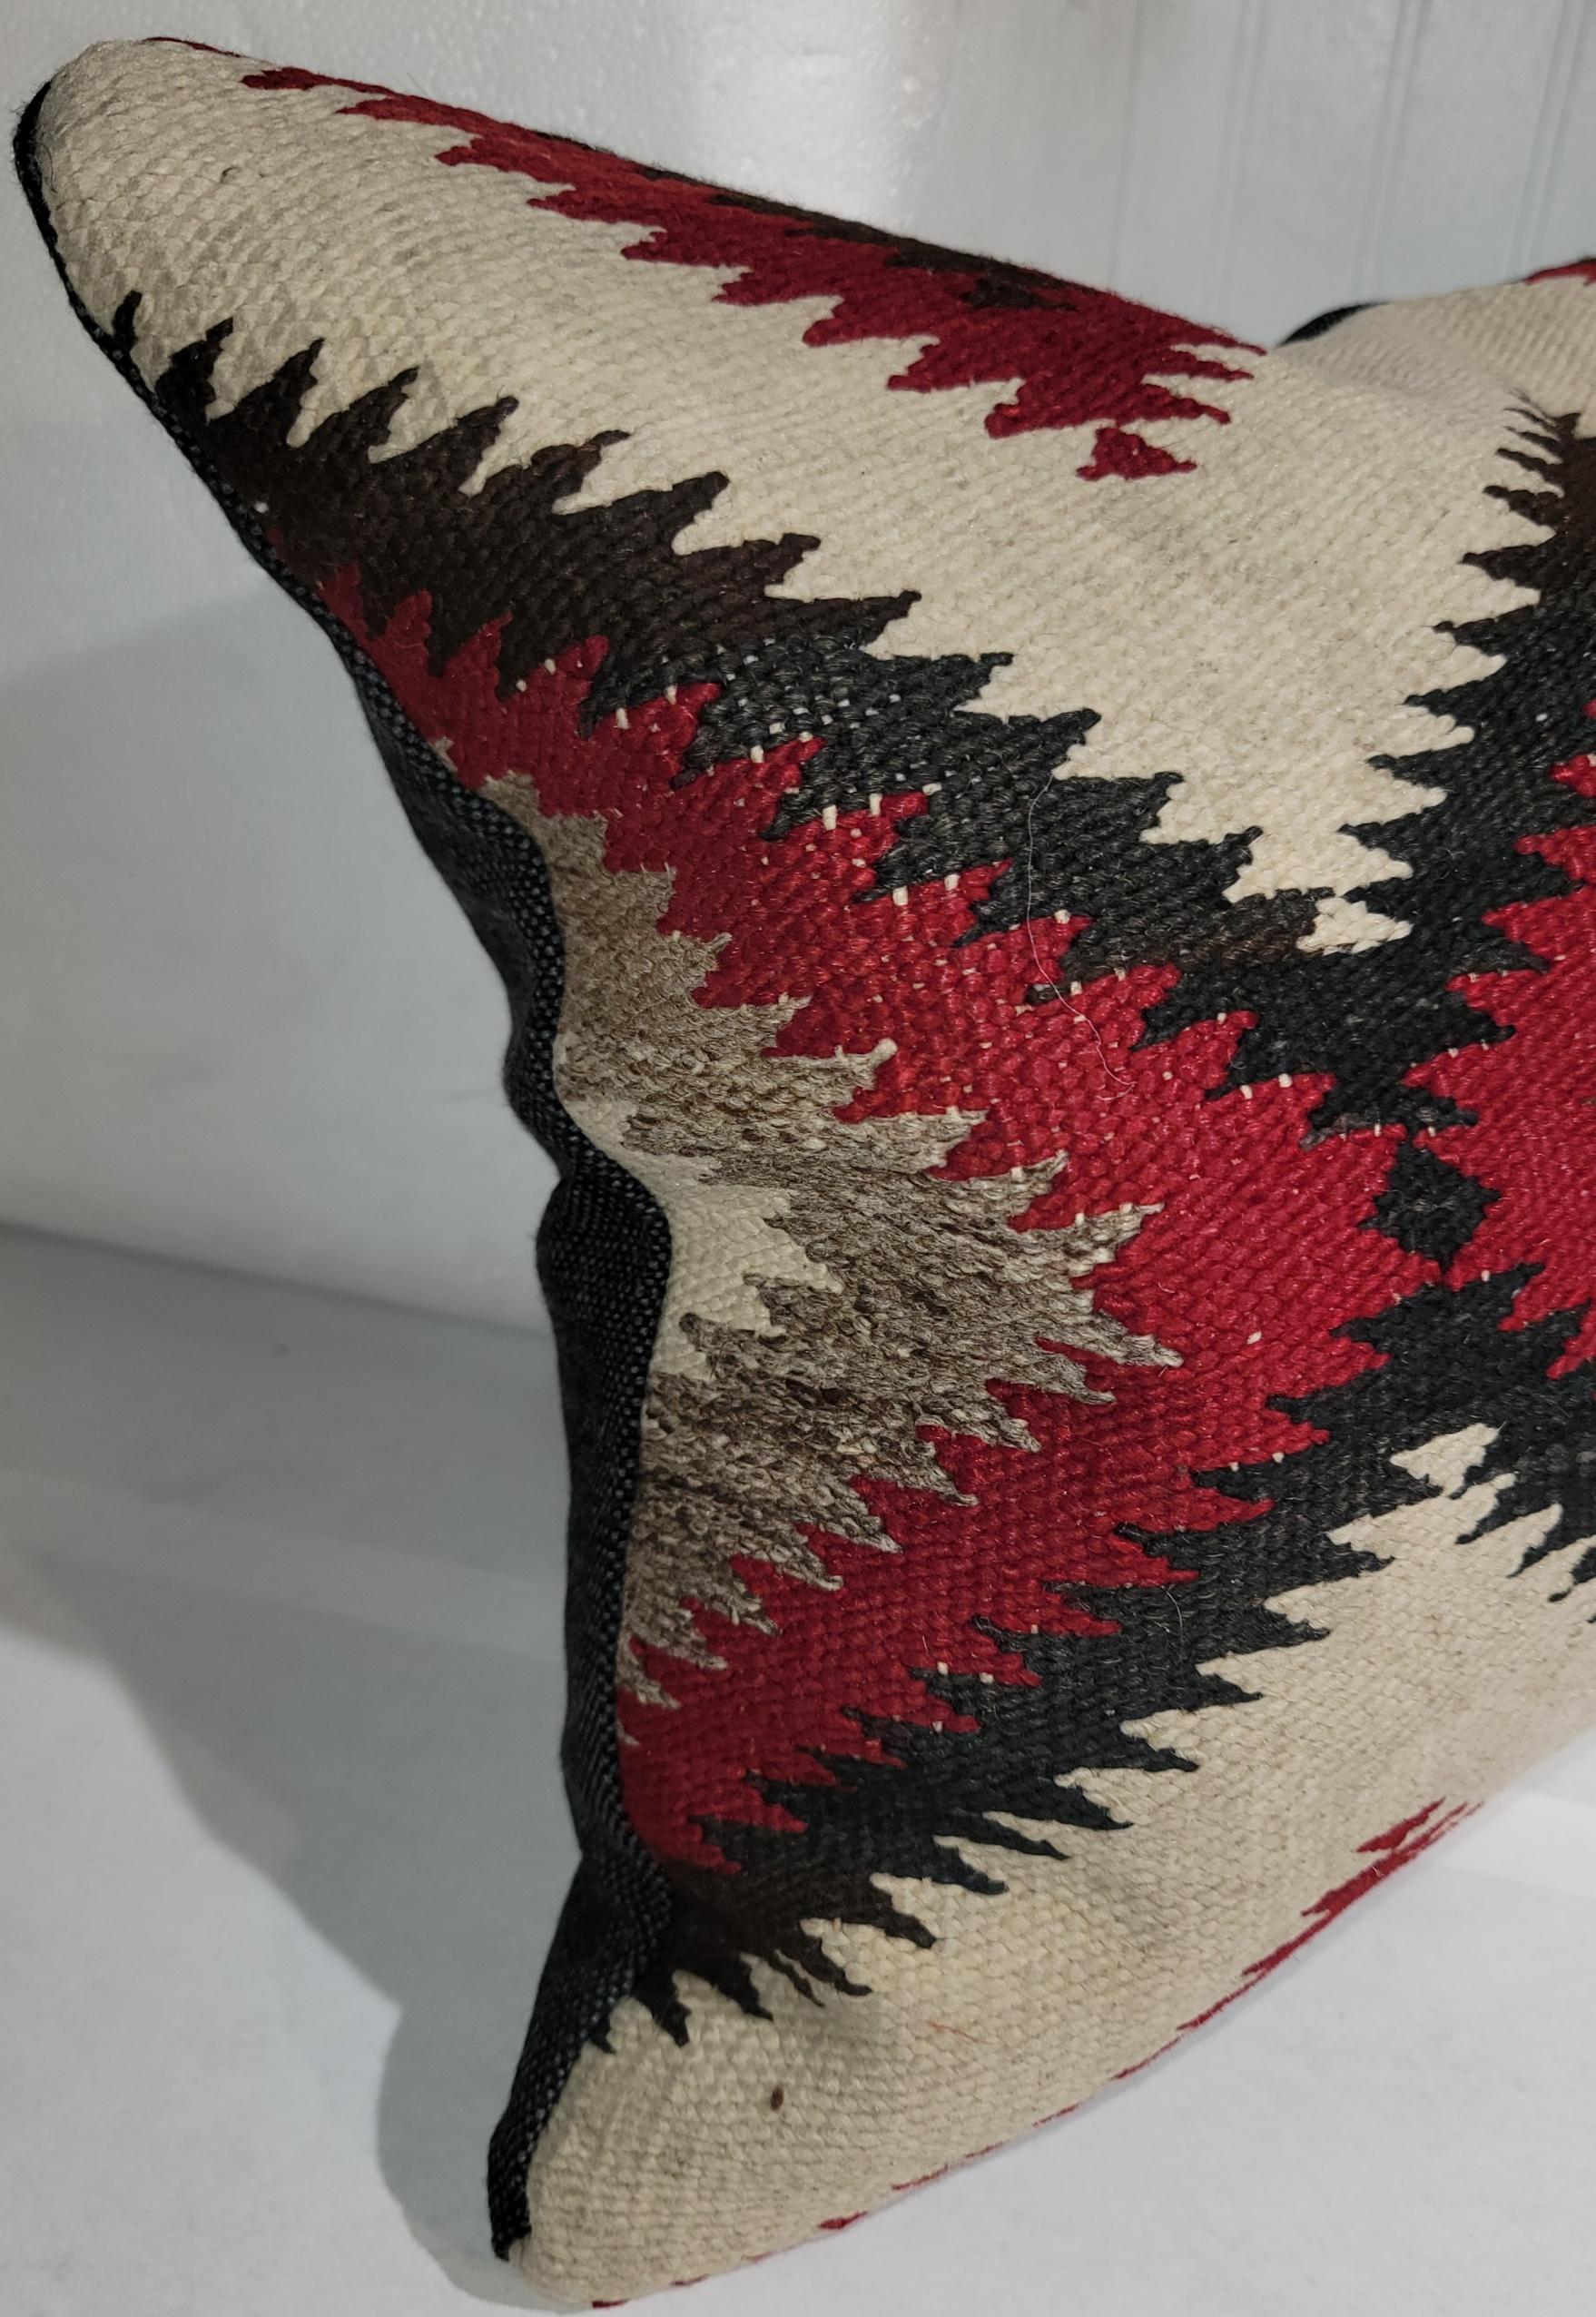 Early 20thc Navajo Indian weaving pillow with suede leather backing.The inserts are down & feather fill.